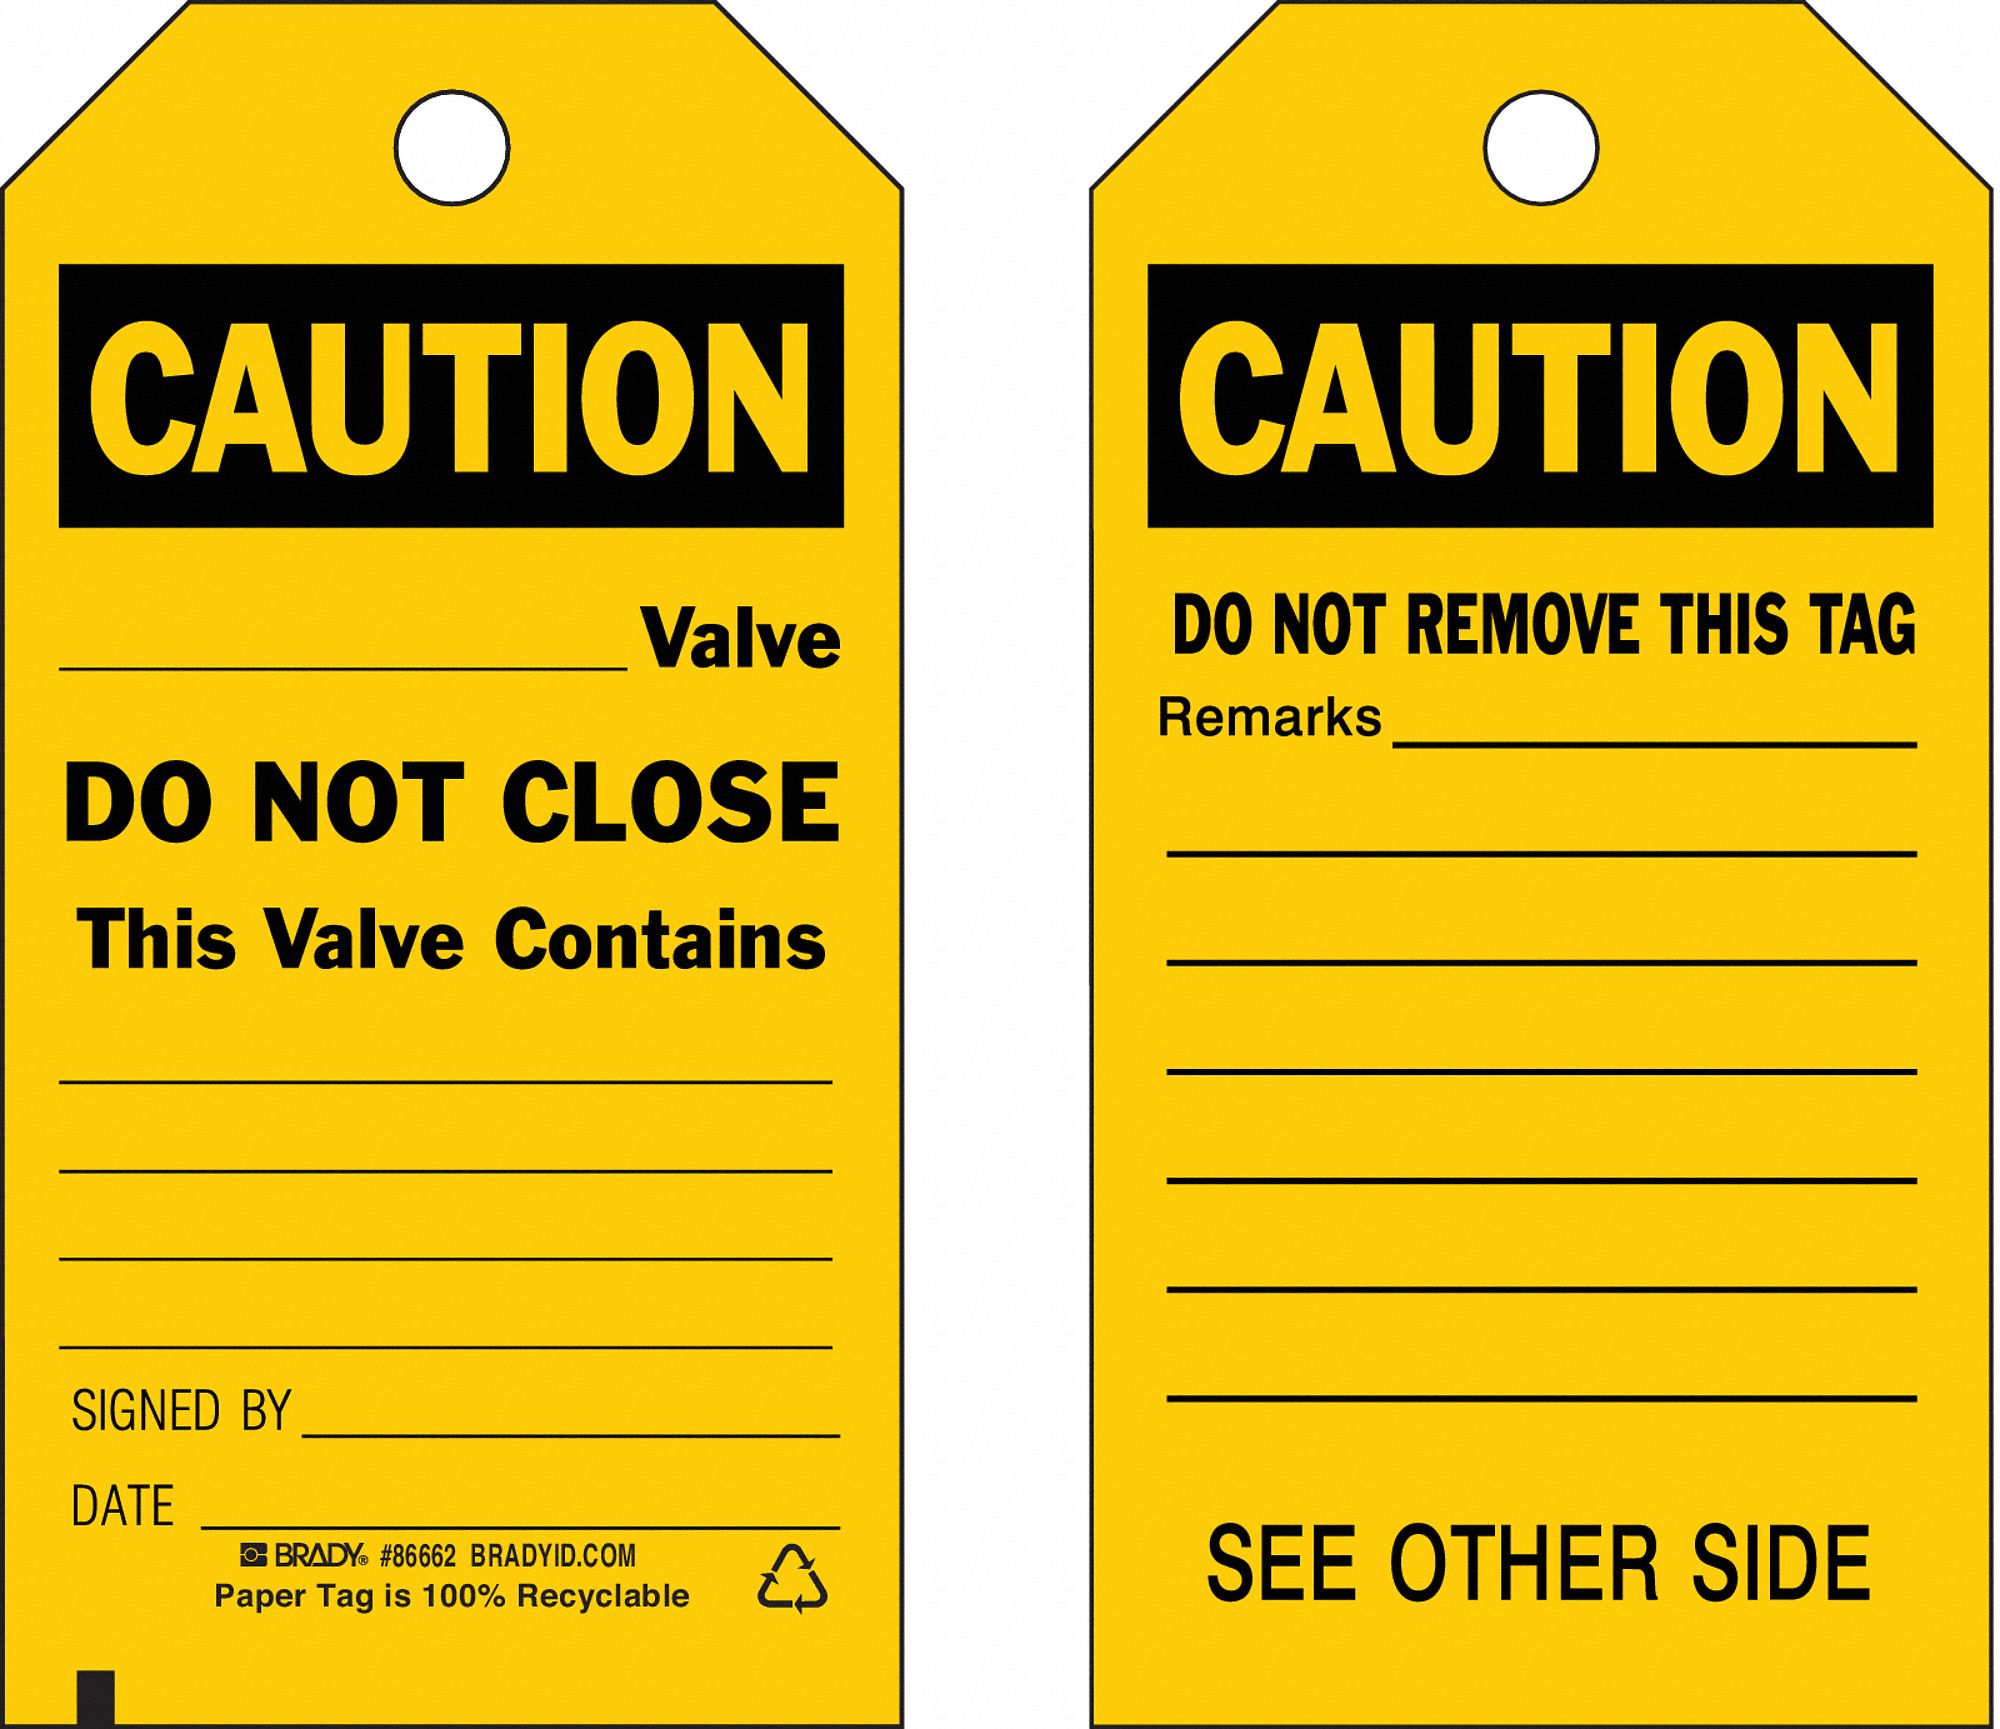 Cardstock___Valve Do Not Close This Valve Contains___, Caution Tag 5-3/4